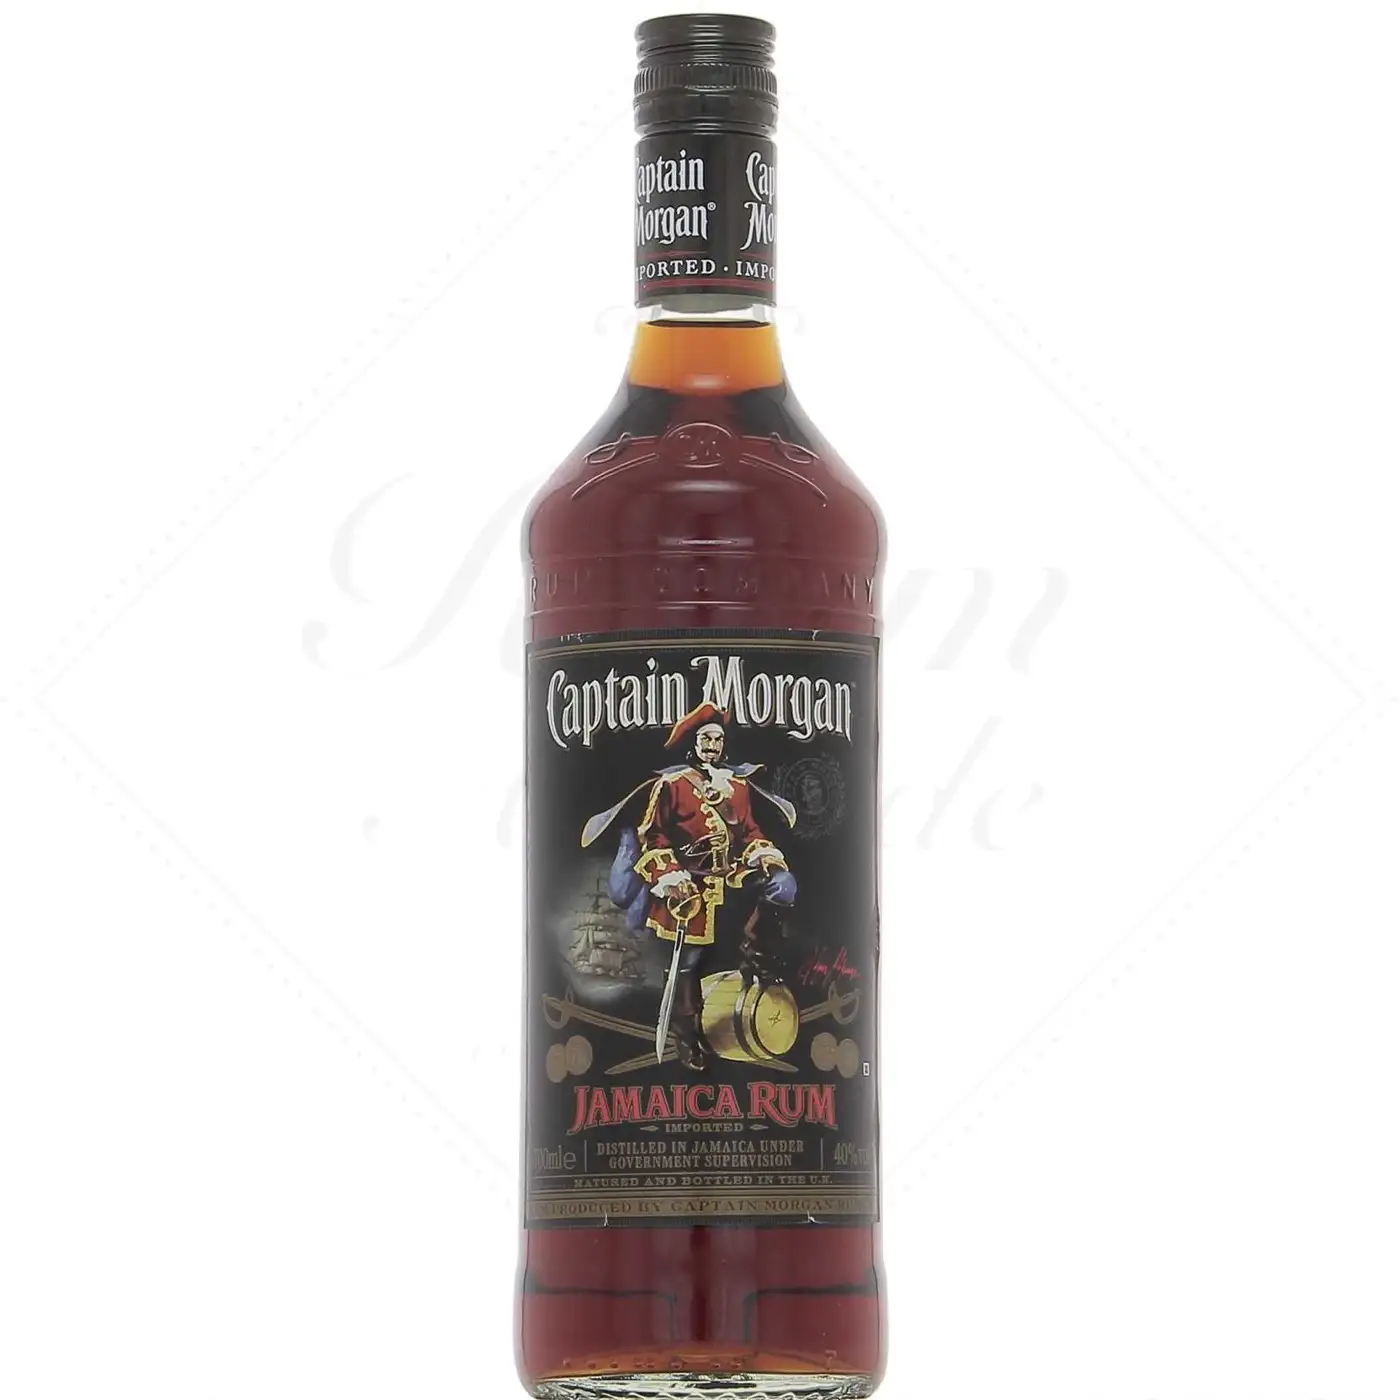 Image of the front of the bottle of the rum Captain Morgan Black Label